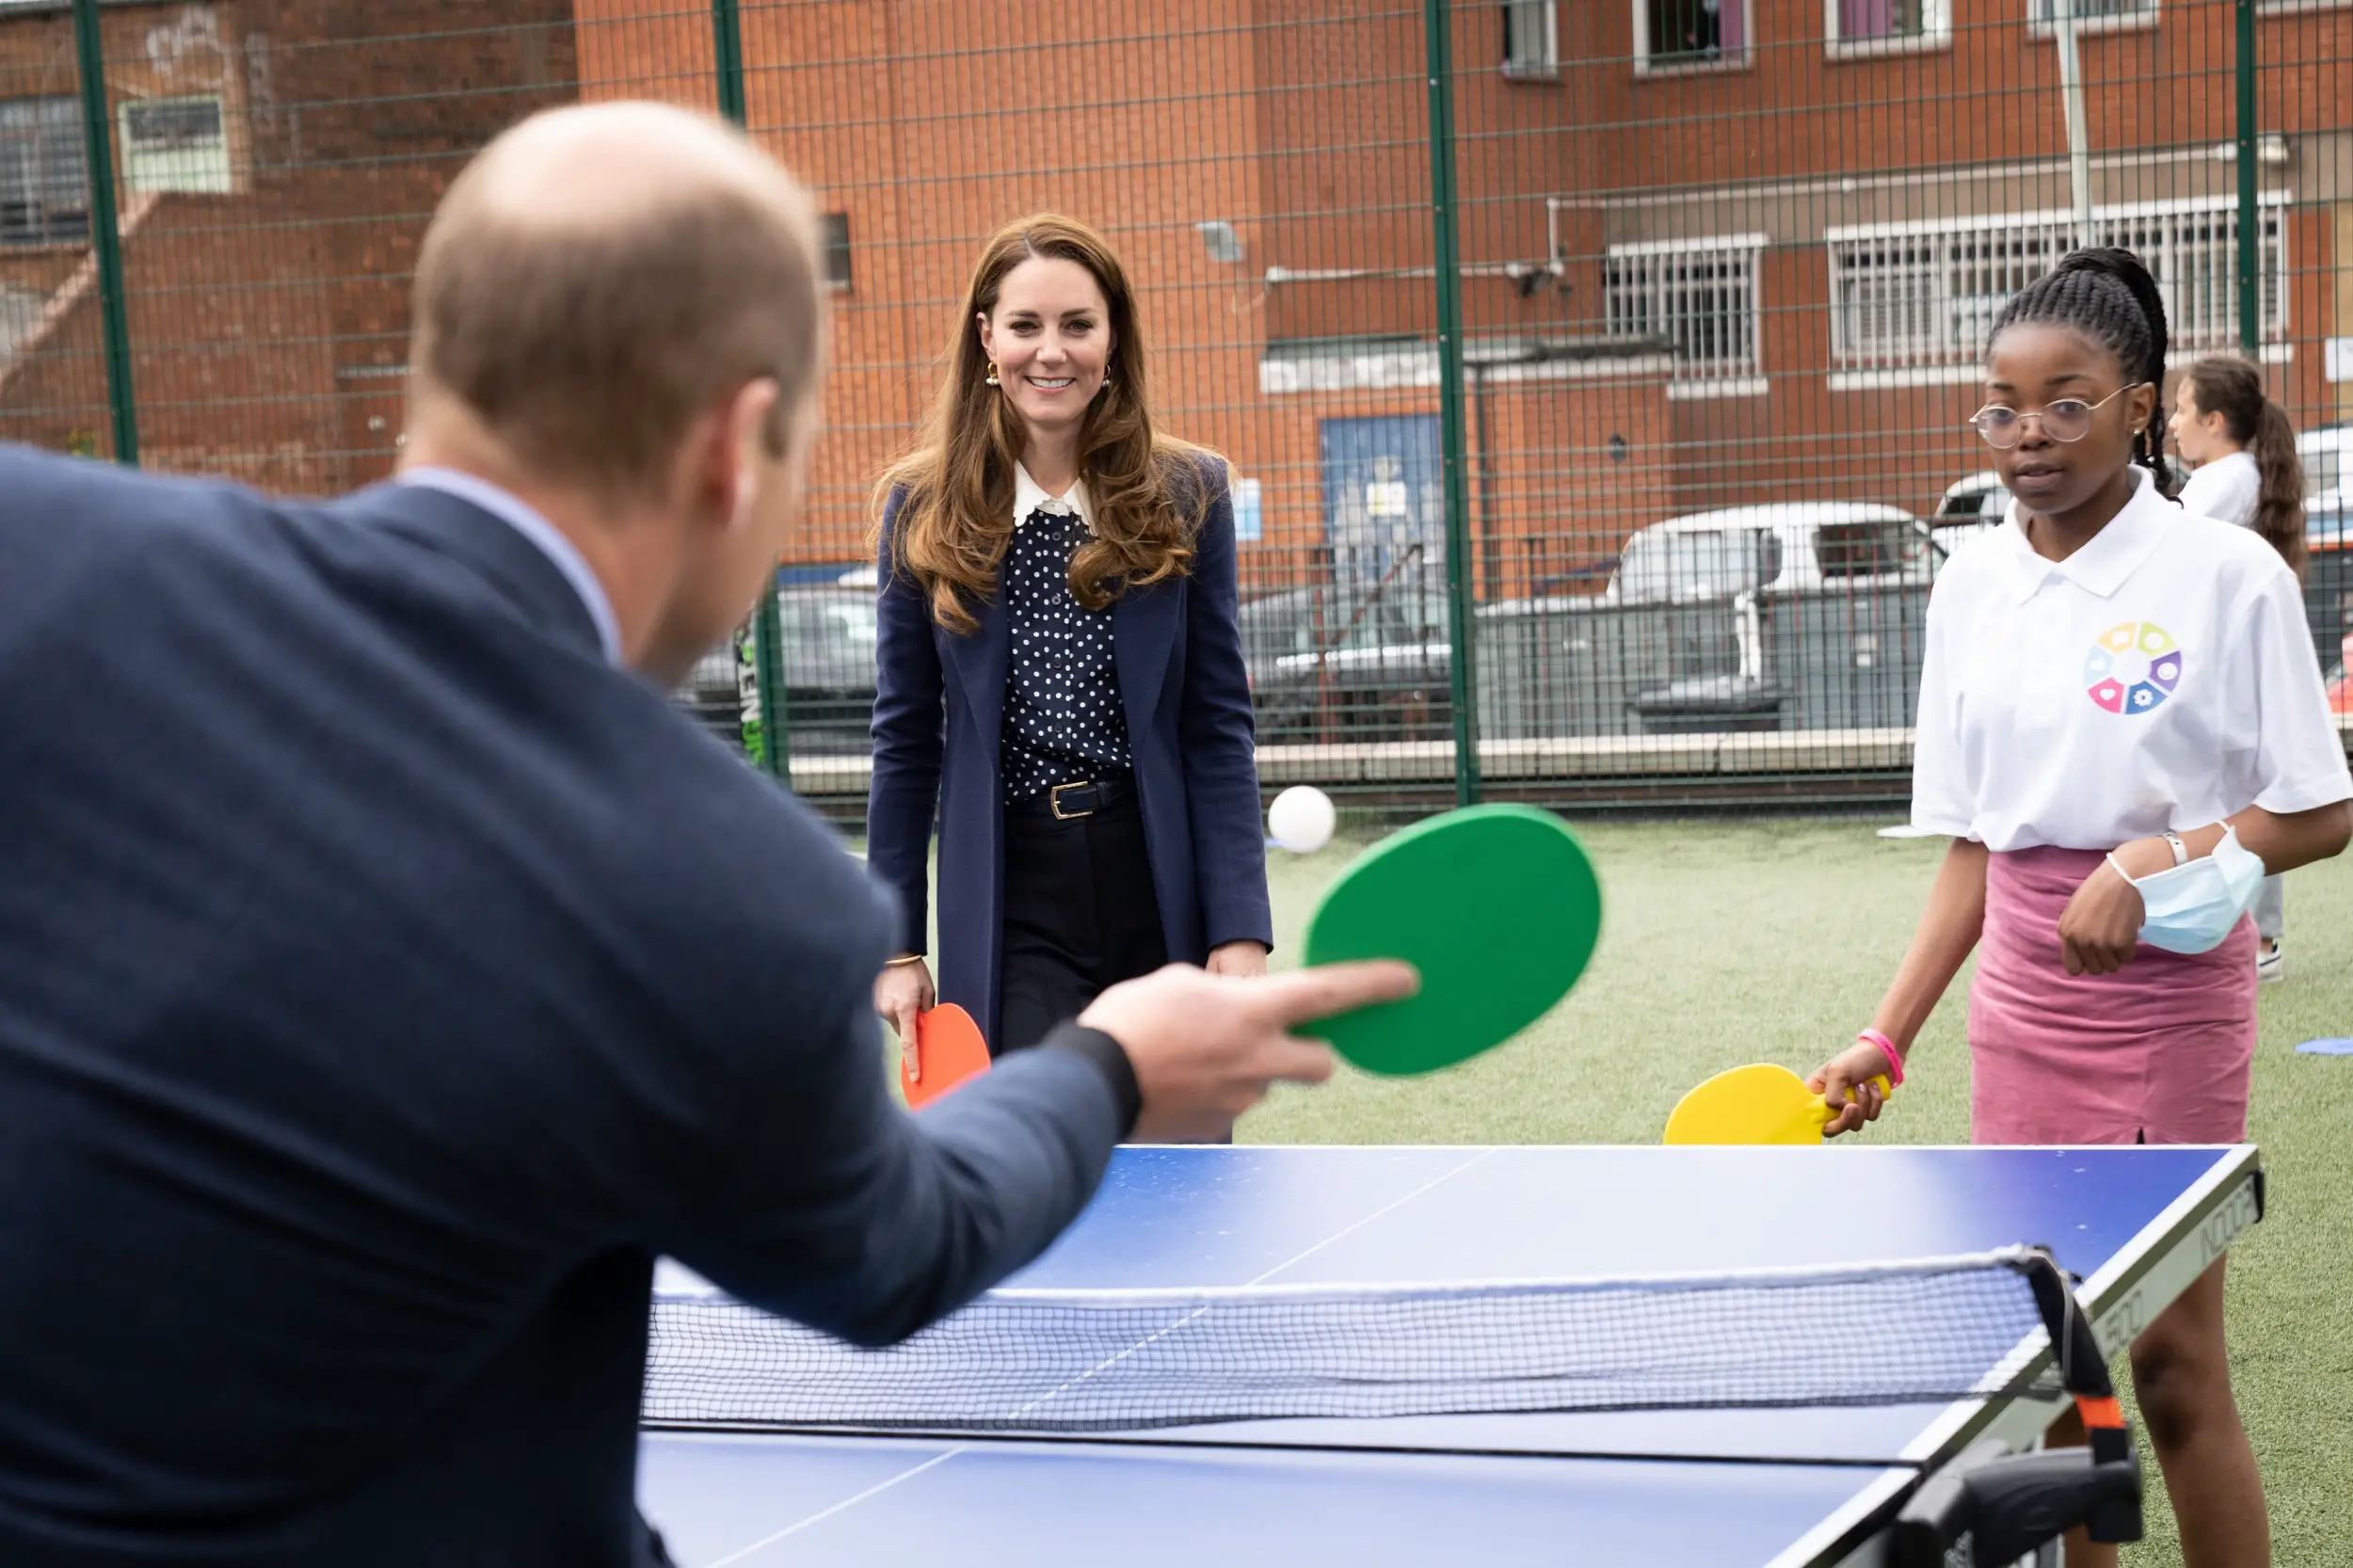 The Duke and Duchess of Cambridge travelled to the West Midlands on Thursday